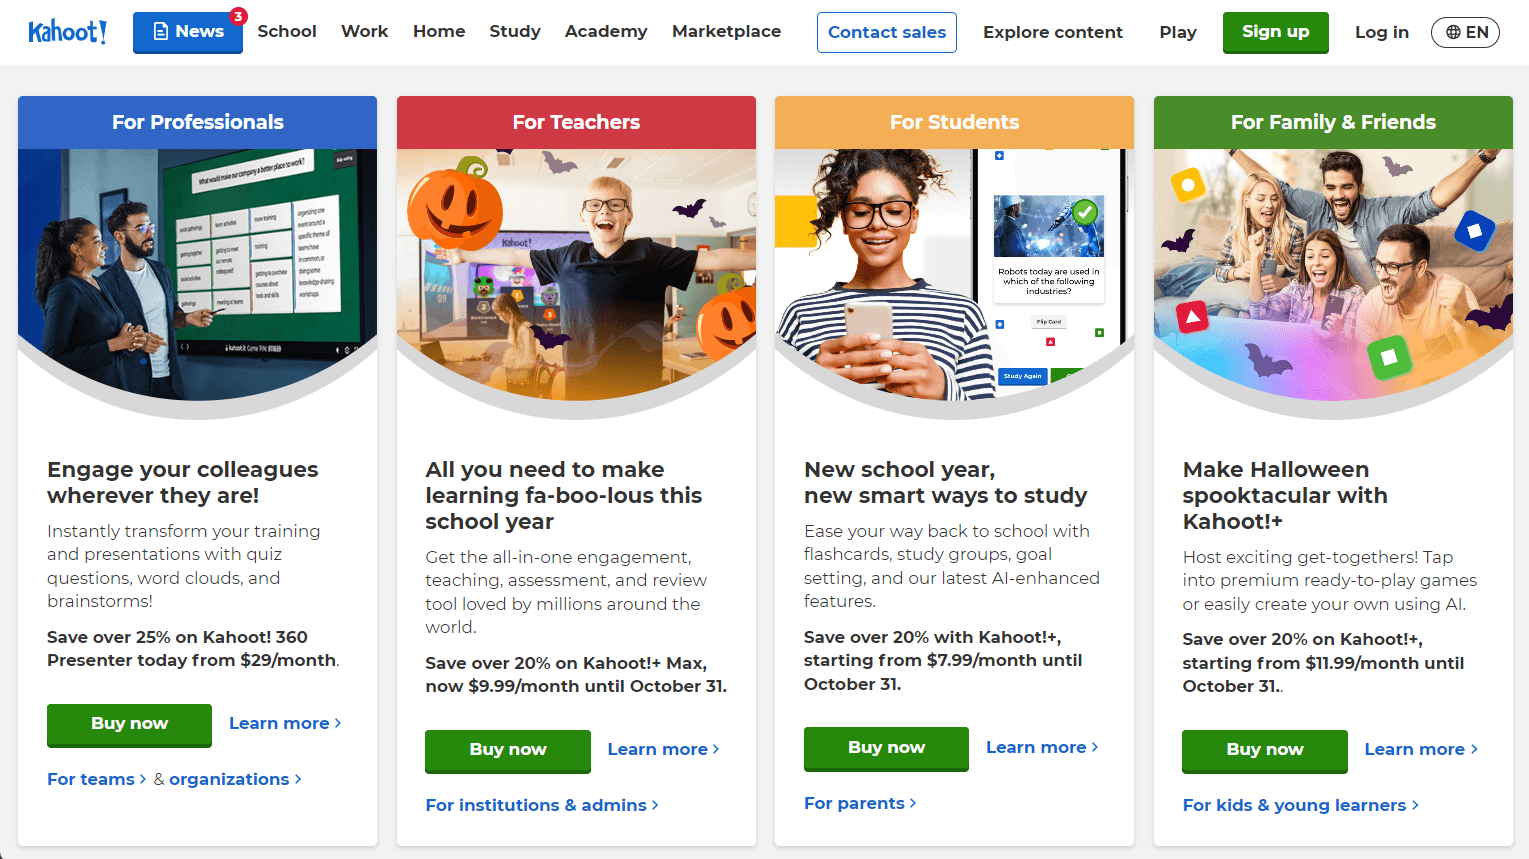 Kahoot's homepage directs users directly to its paid plans.